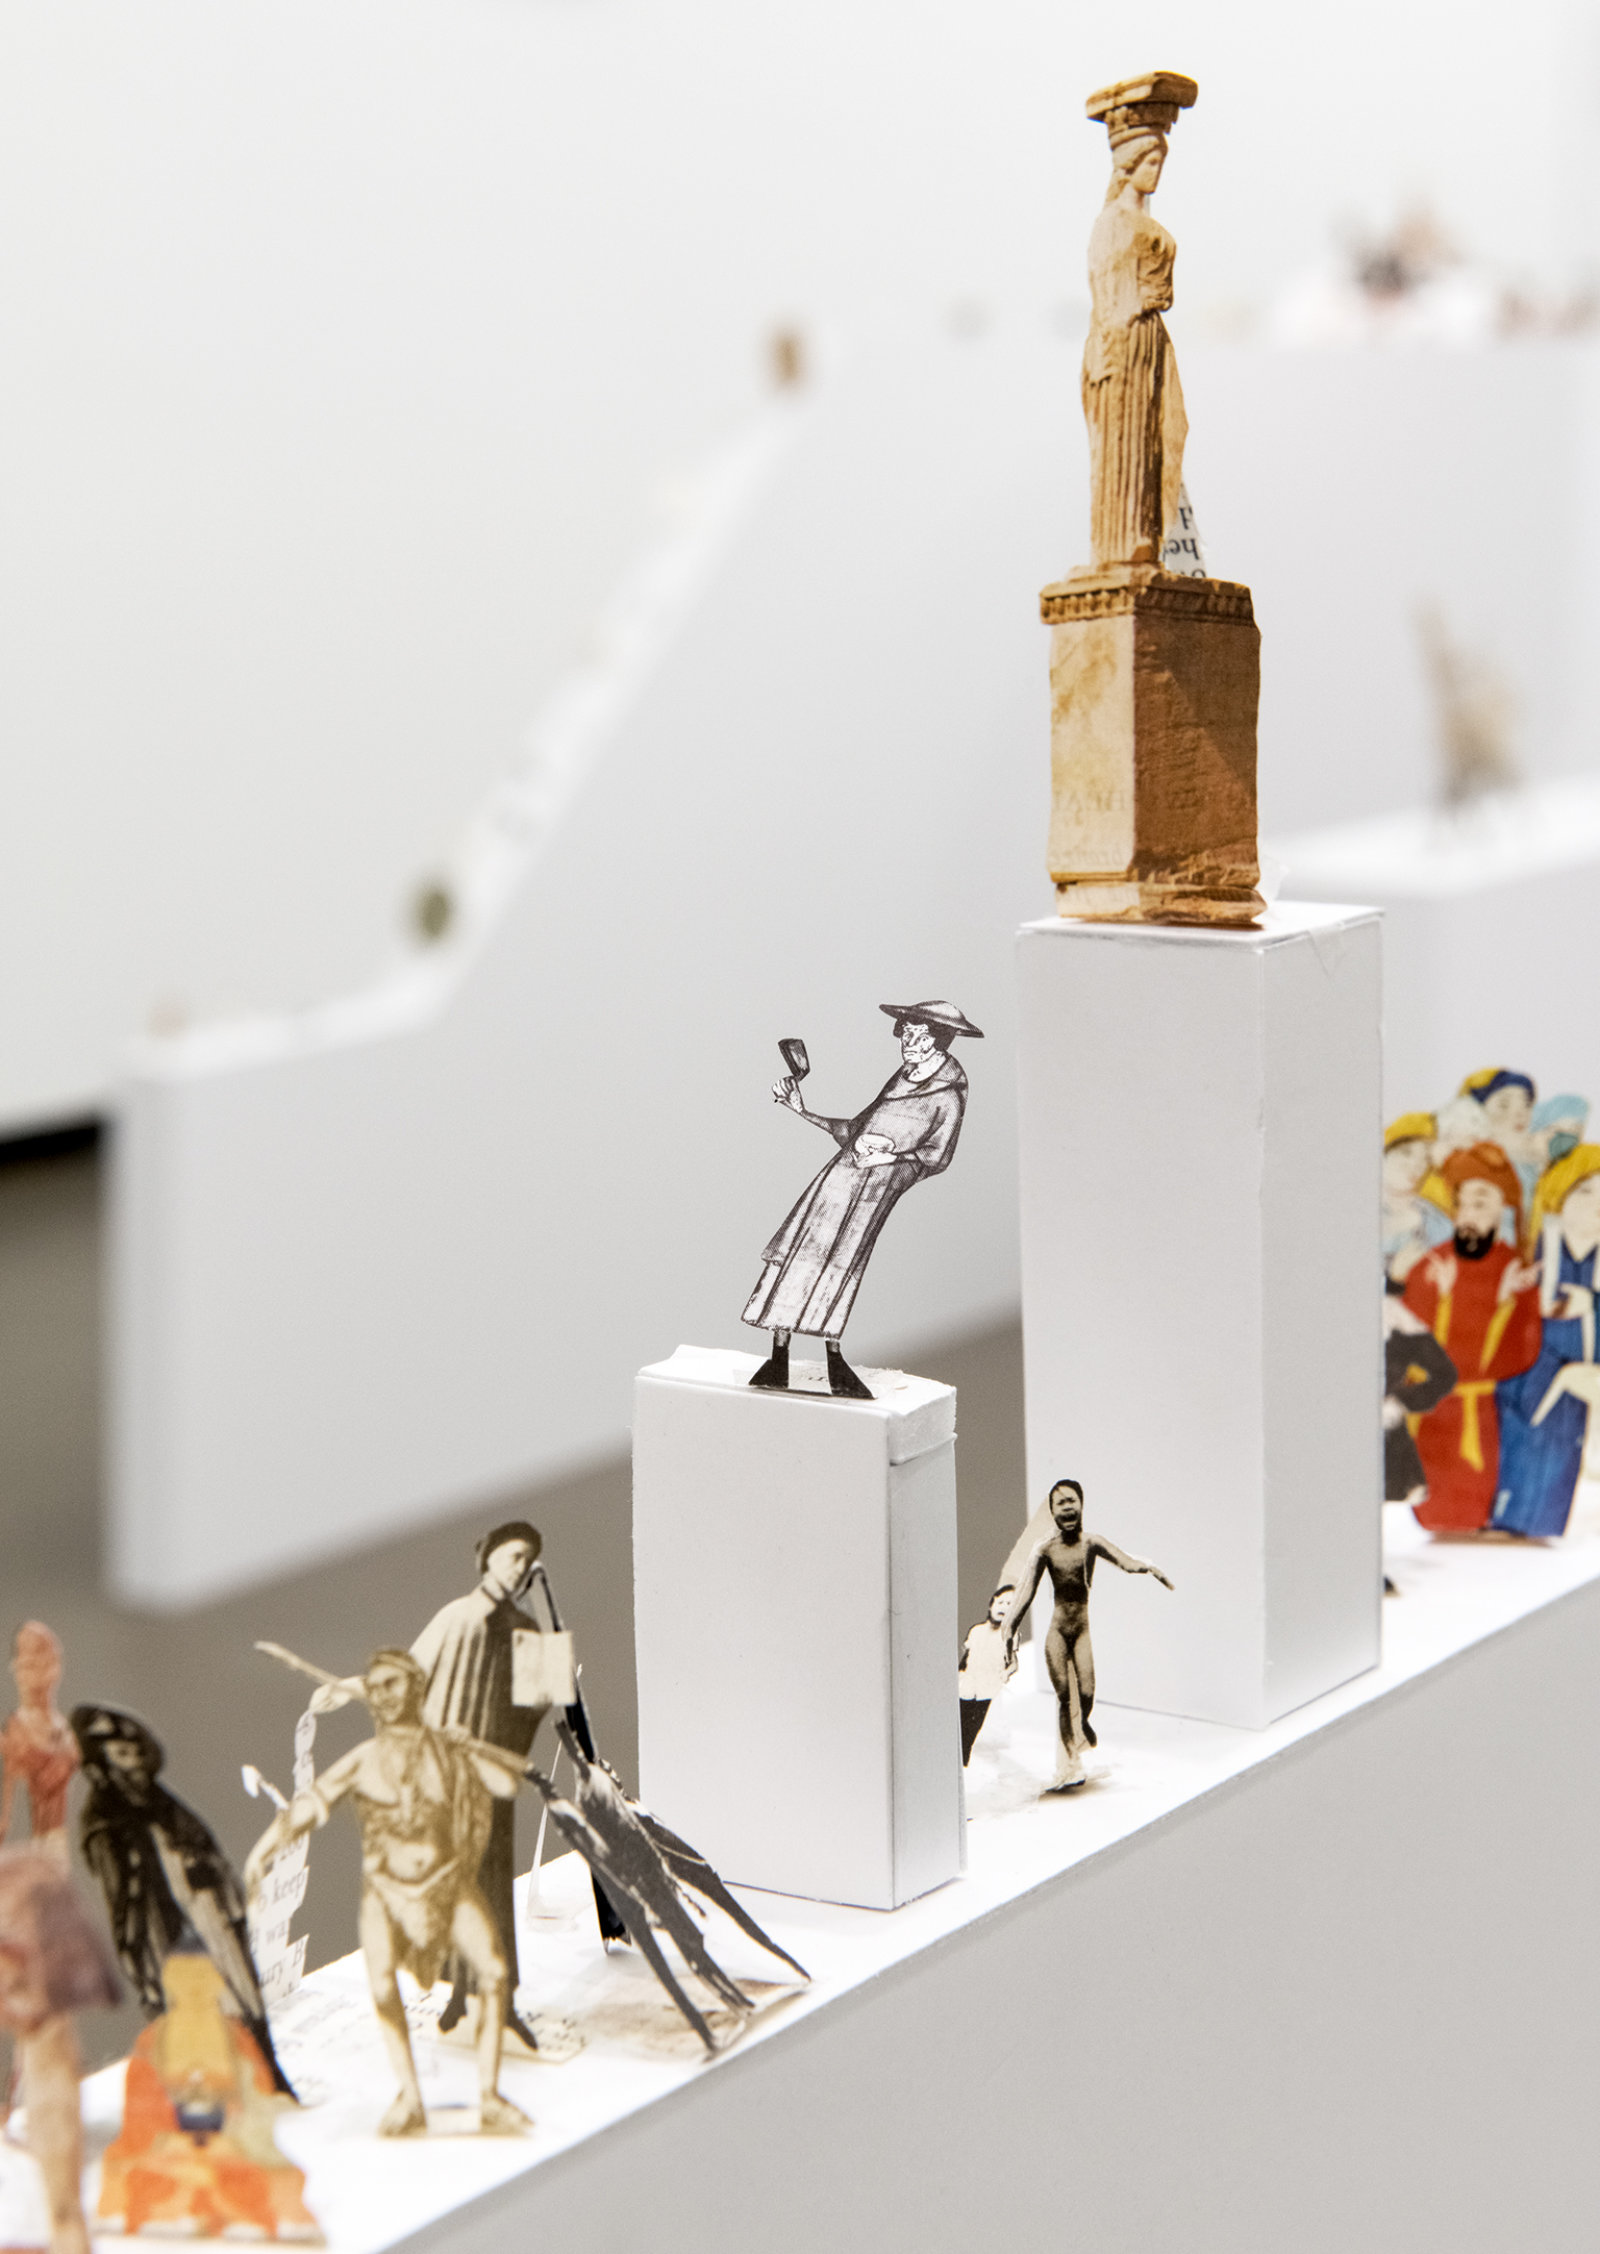 Geoffrey Farmer, The Last Two Million Years, 2007, foamcore plinths, perspex frames and cutouts from selected pages of the history book The Last Two Million Years, dimensions variable. Installation view, How Do I Fit This Ghost in My Mouth?, Vancouver Art Gallery, 2015